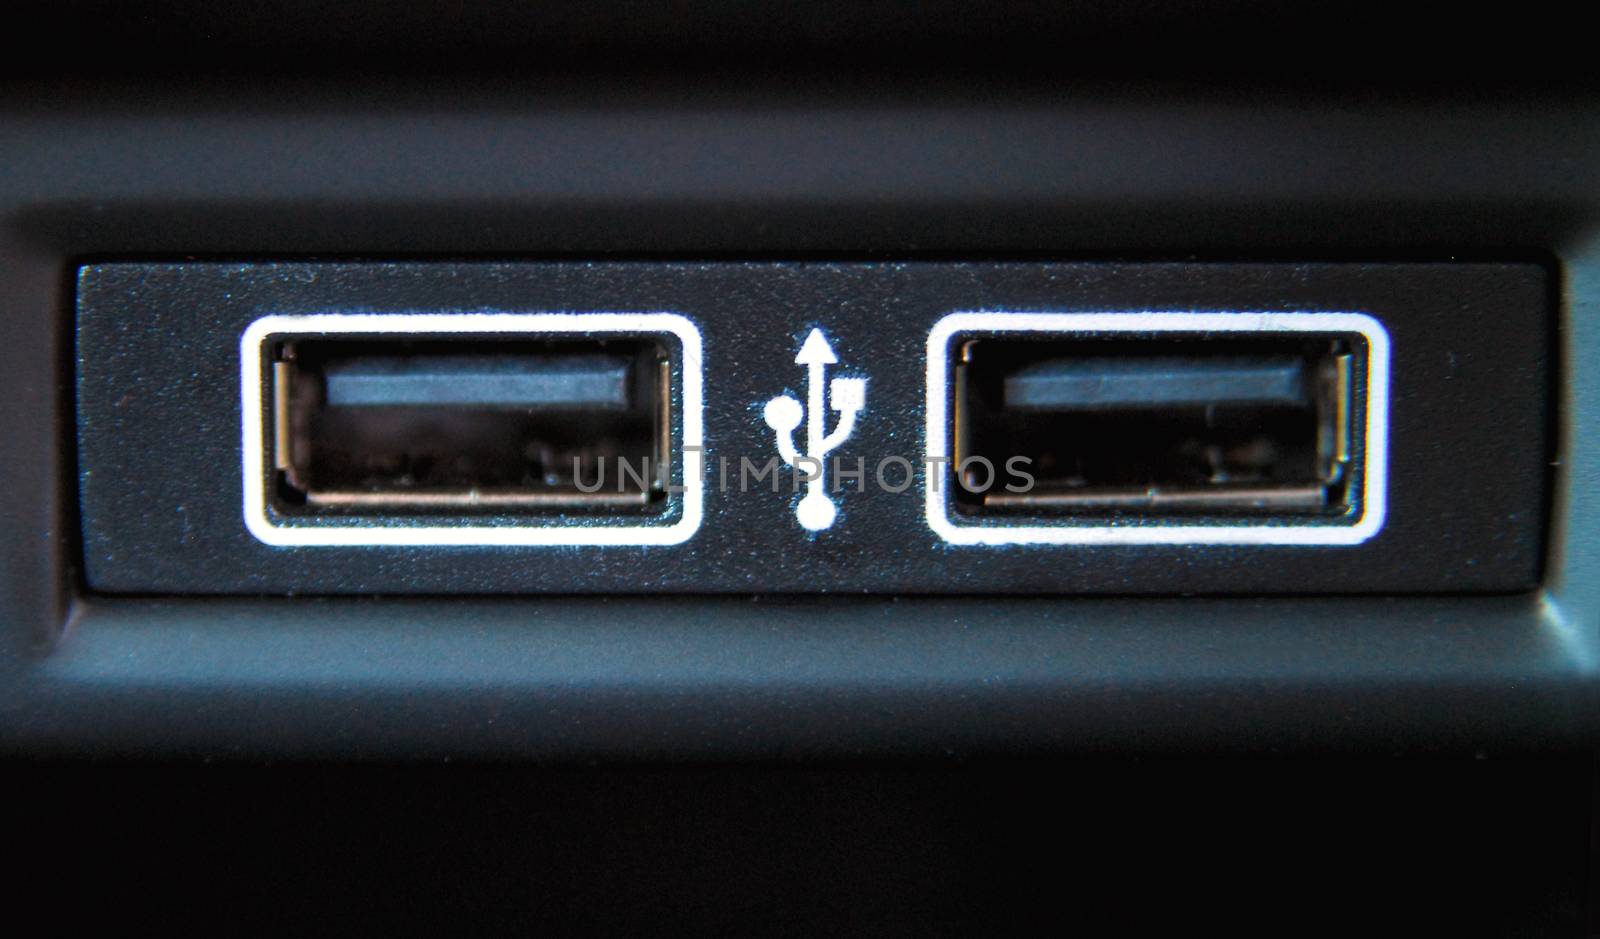 USB port in the car panel by aselsa